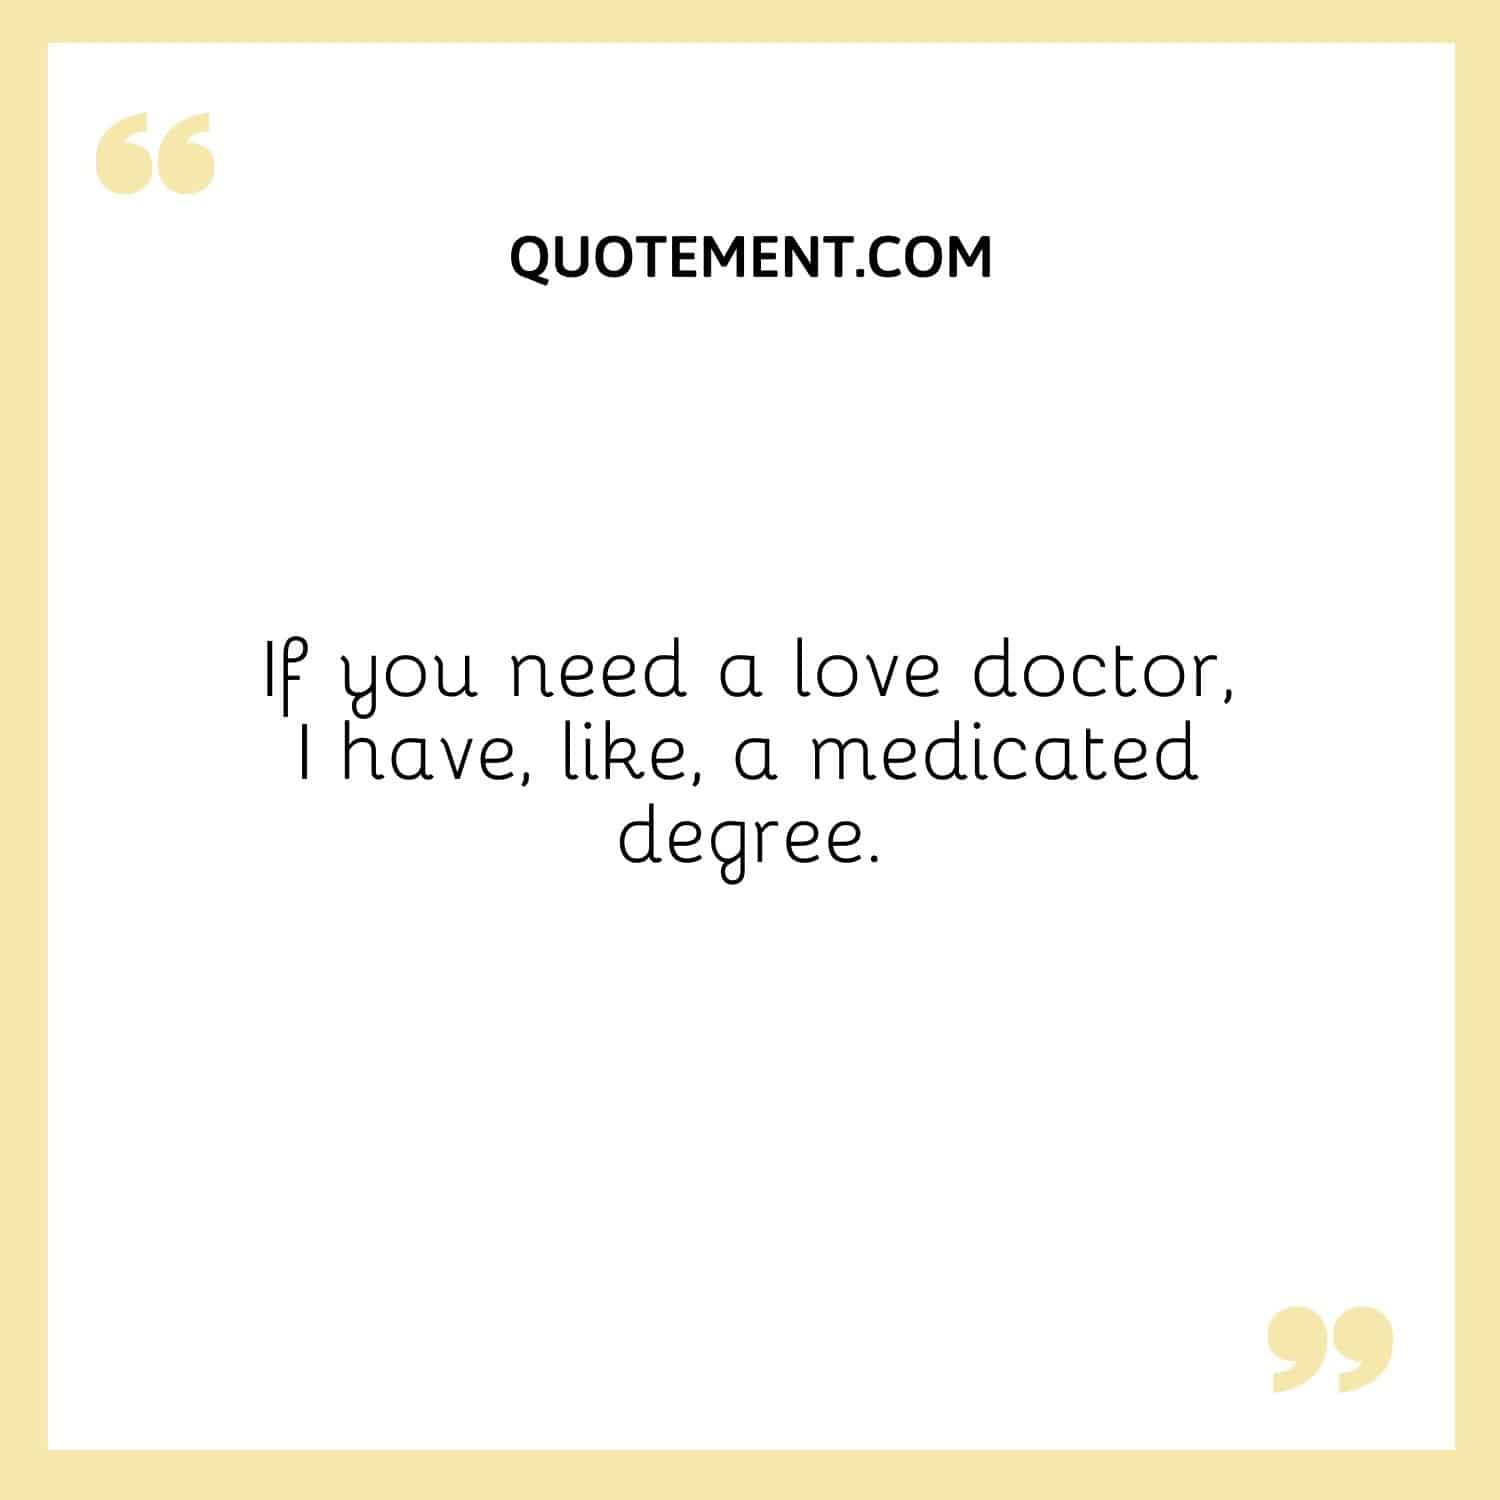 If you need a love doctor, I have, like, a medicated degree.